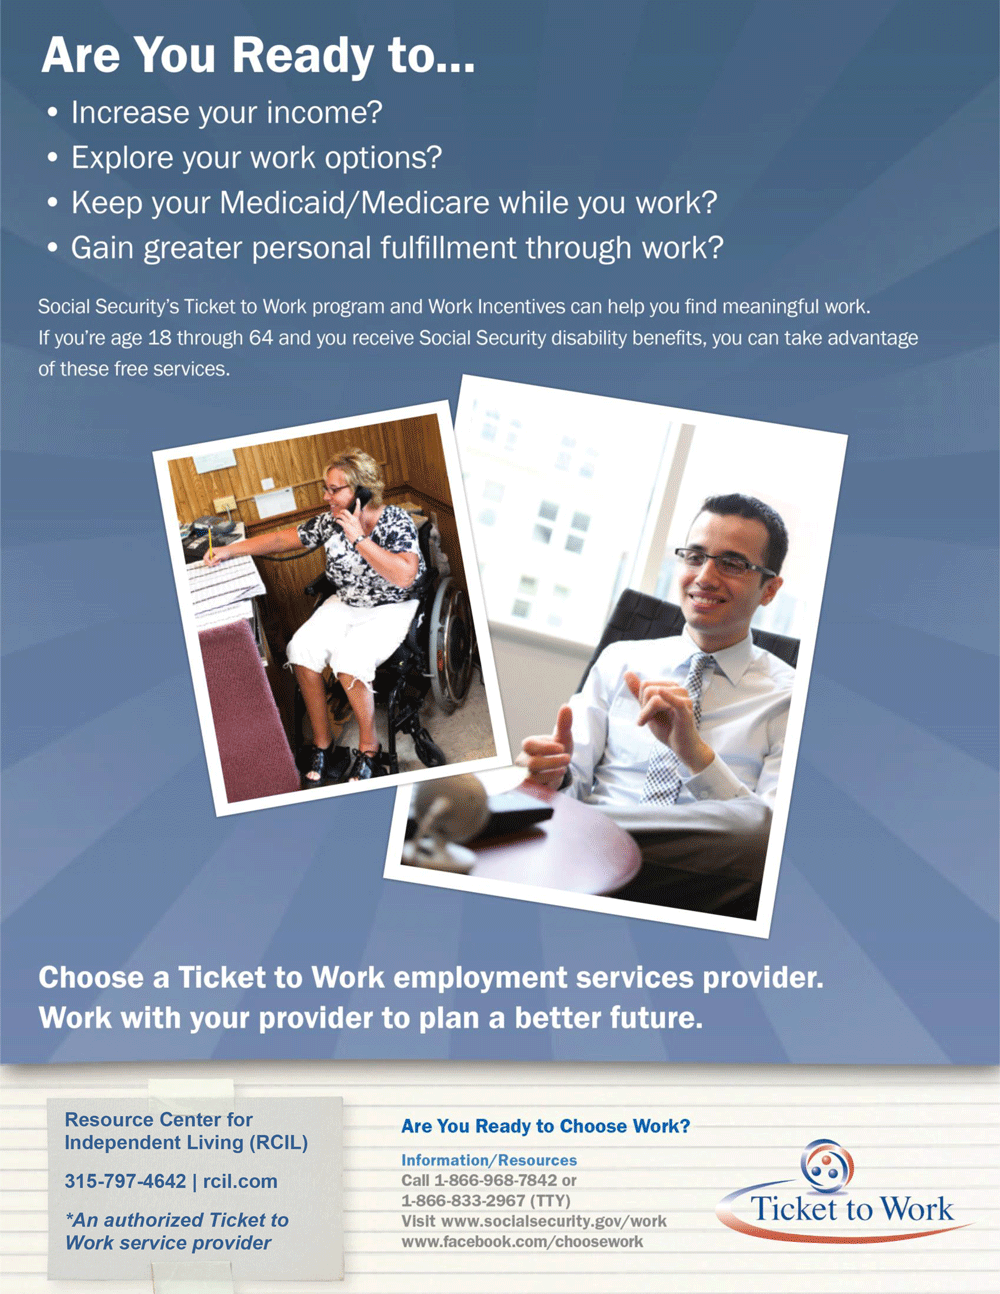 Are you ready to work? Social Security’s Ticket to Work program supports career development for people with disabilities who want to work. Social Security disability beneficiaries age 18 through 64 qualify. The Ticket program is free and voluntary. The Ticket program helps people with disabilities progress toward financial independence.  Choosing to work can change your life. The Ticket to Work program and Work Incentives allow you to keep your benefits while you explore employment, receive vocational support and gain work experience. If you are age 18 through 64 and receive Social Security Disability Insurance (SSDI) and/or Supplemental Security Income (SSI) you already qualify! To figure out if Ticket to Work may be right for you, visit www.ssa.gov/work.